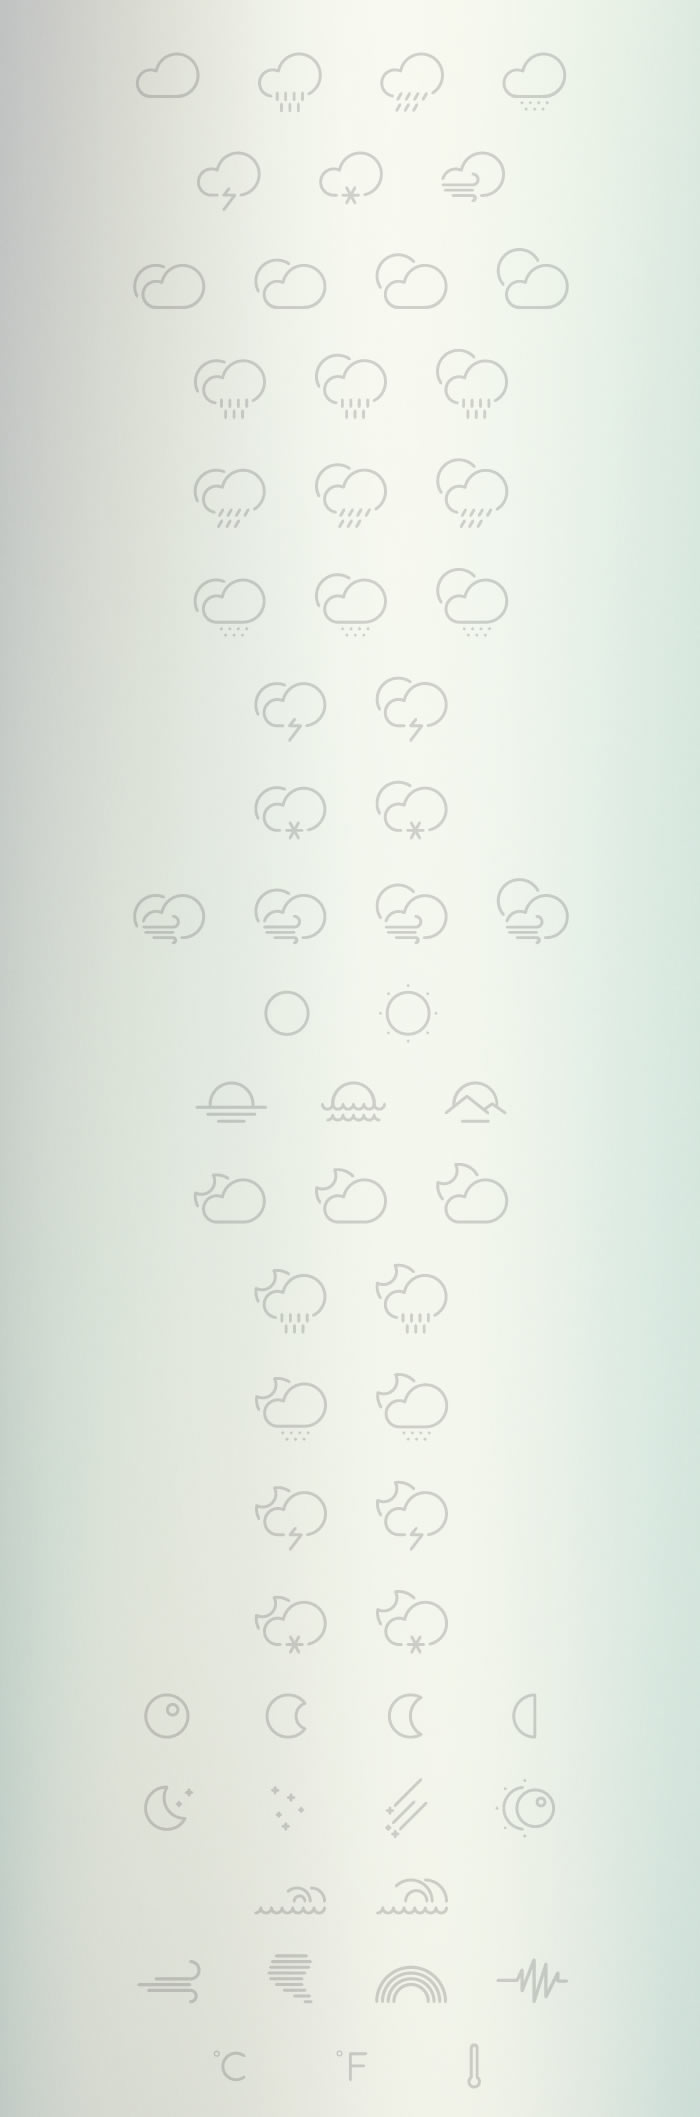 Outlined Weather Icons Collection Preview